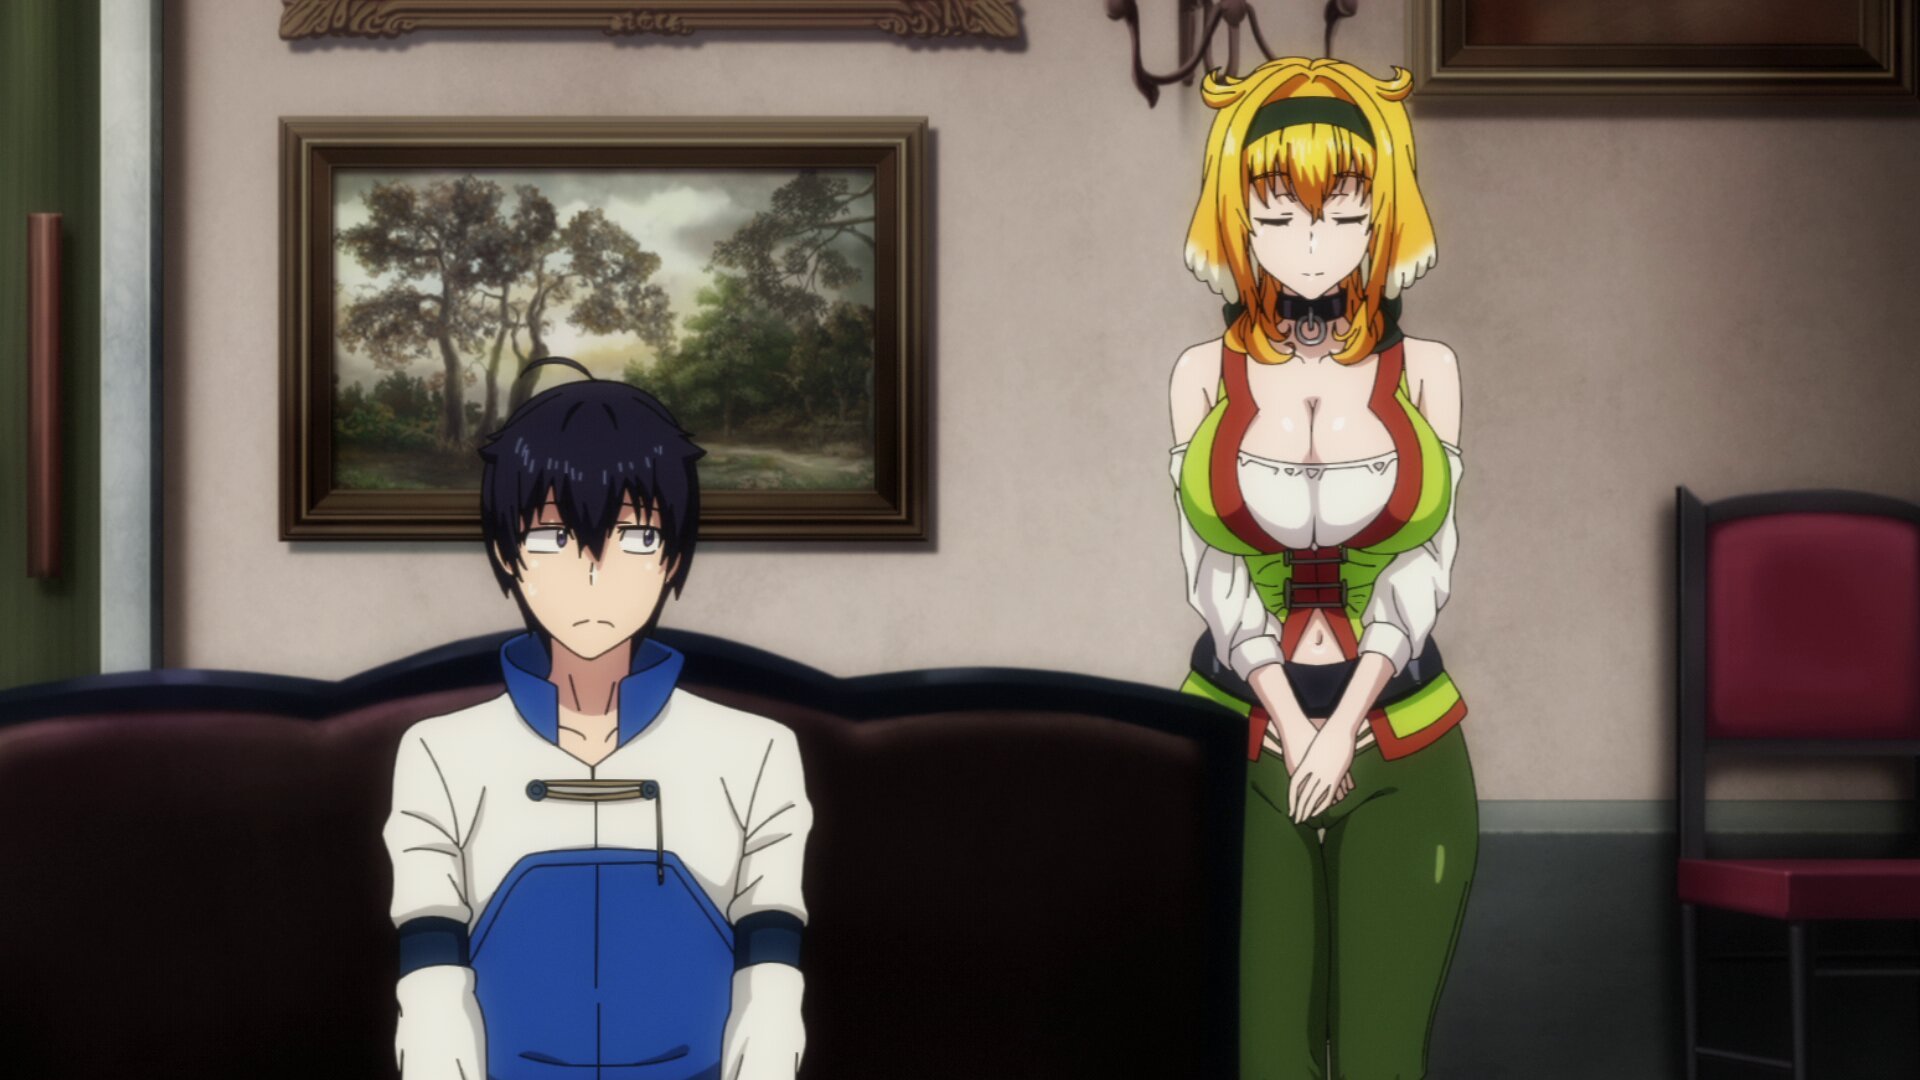 Harem in the Labyrinth of Another World Anime Review, by Sajonji